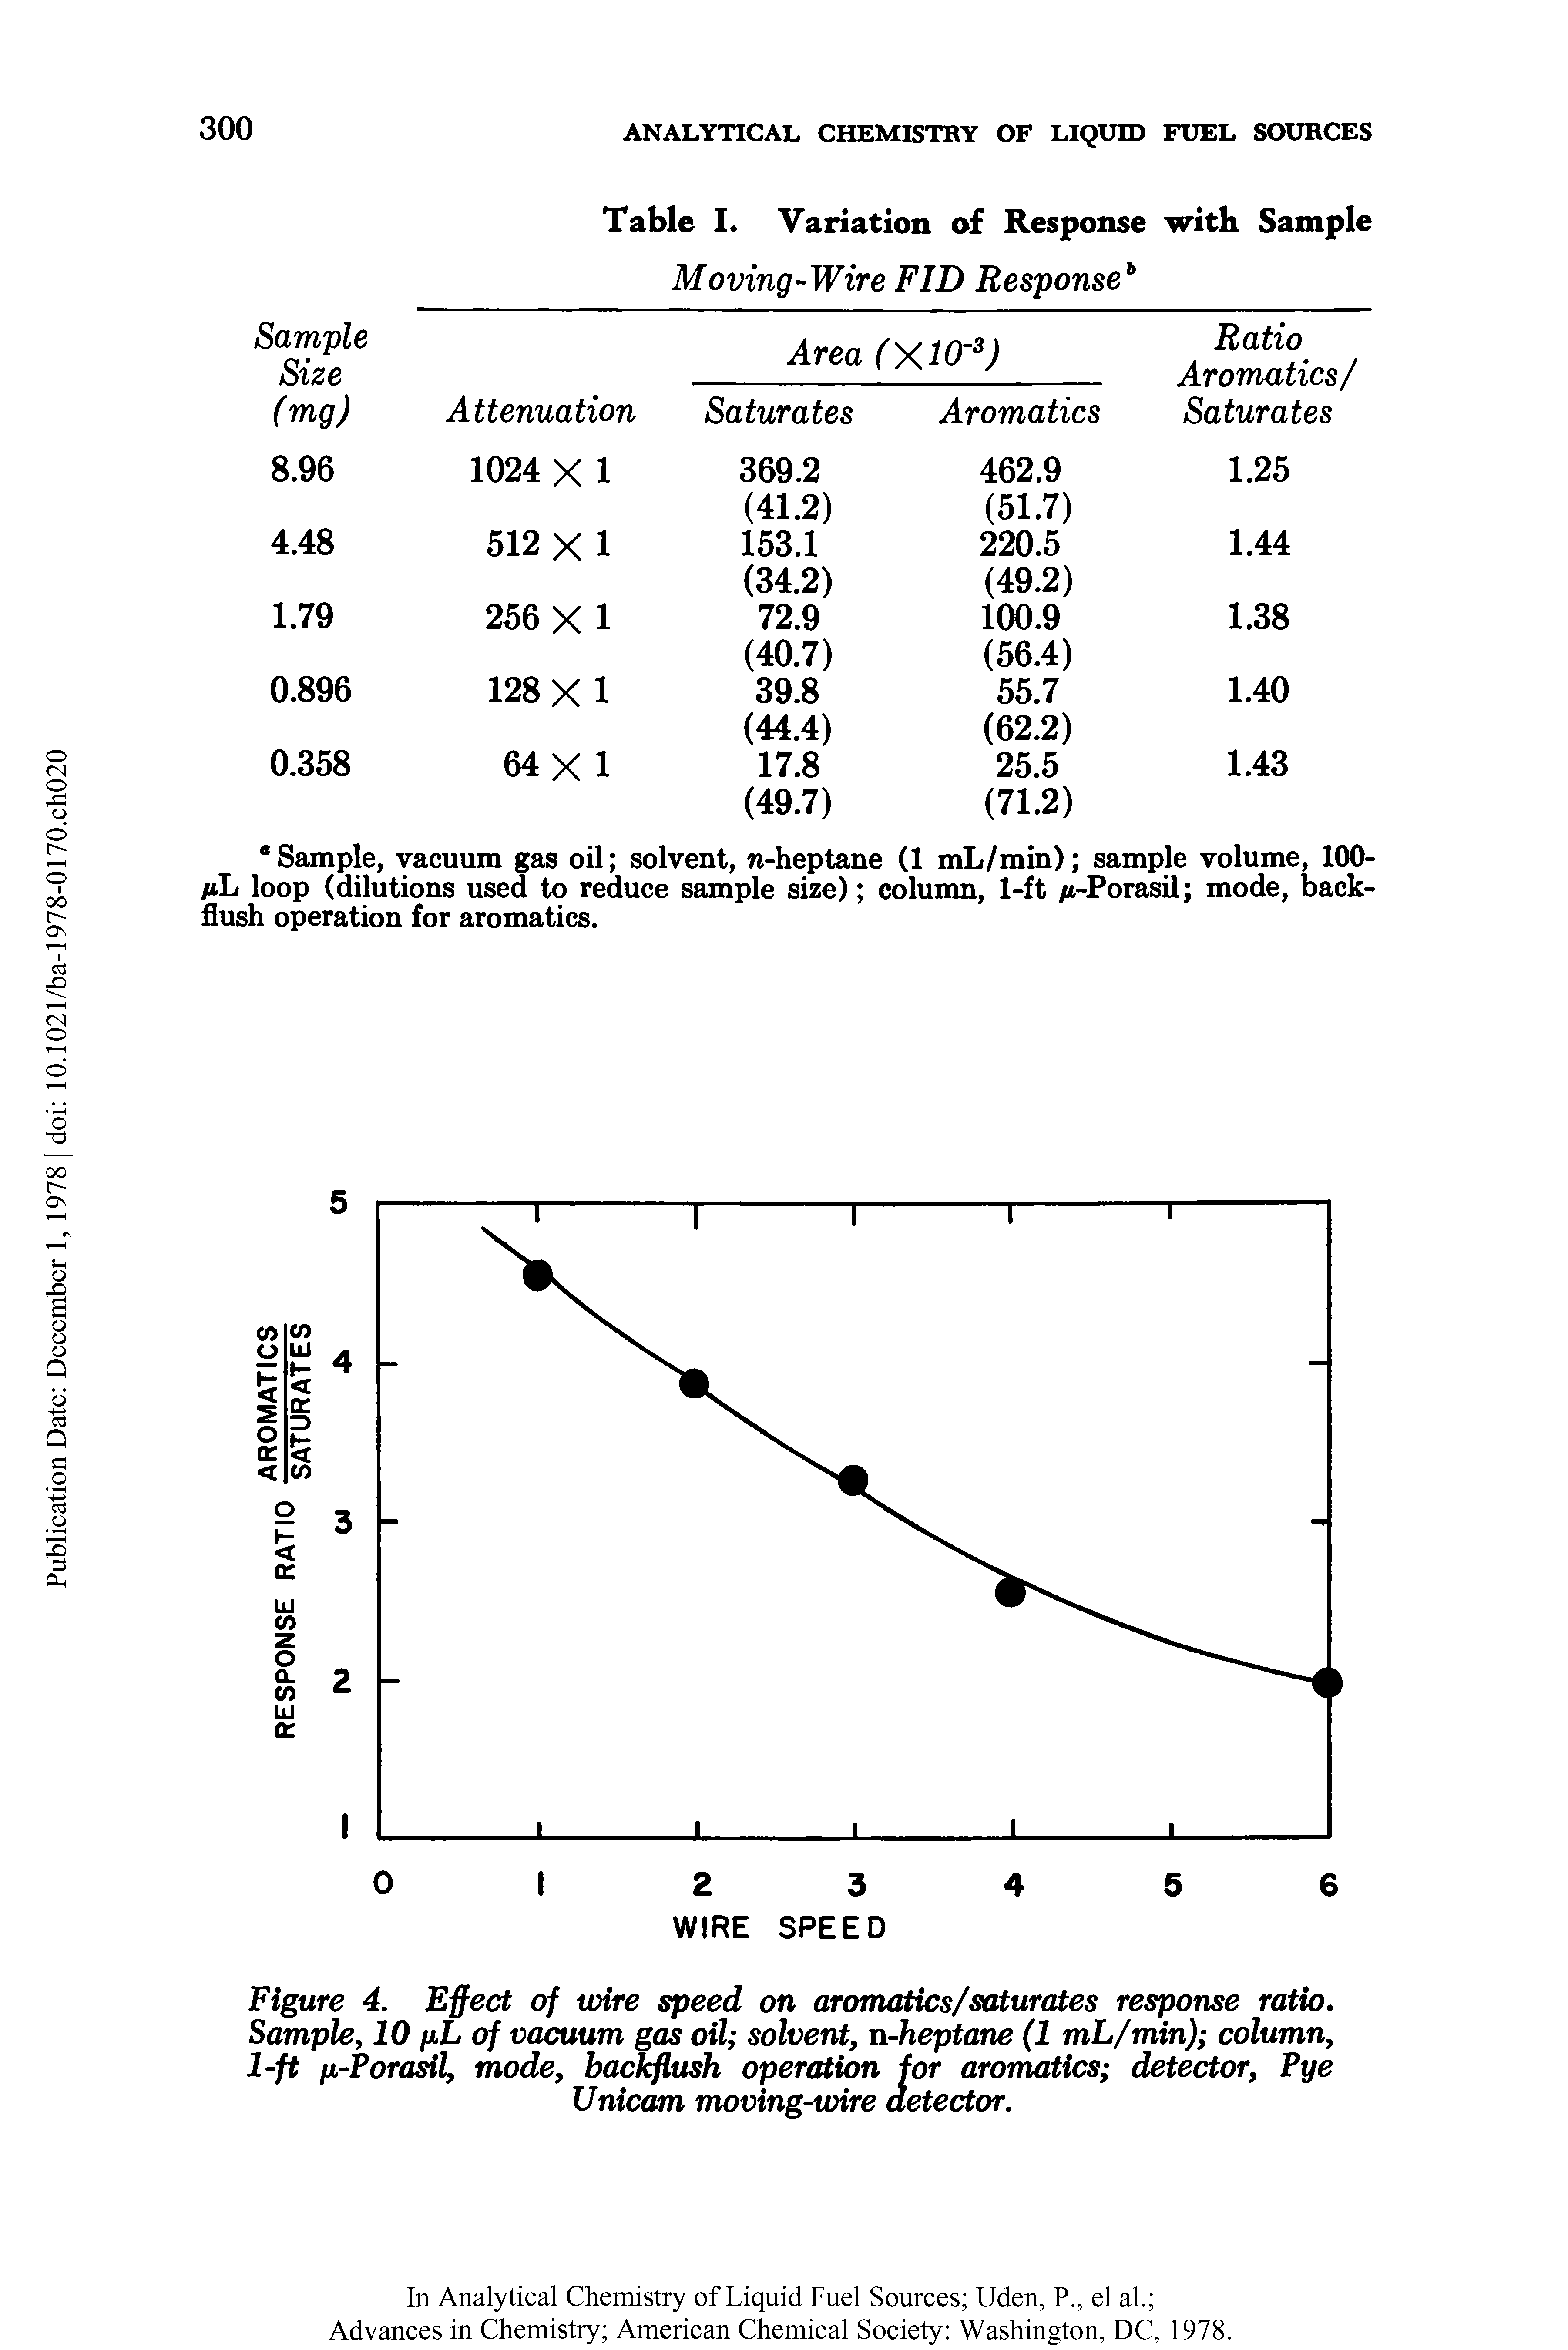 Figure 4. Effect of wire speed on aromatics/saturates response ratio. Sample, 10 fiL of vacuum gas oil solvent, n-heptane (1 mL/min) column, 1-ft fi-Porakl, mode, backflush operation for aromatics detector, Pye Unicom moving-wire detector.